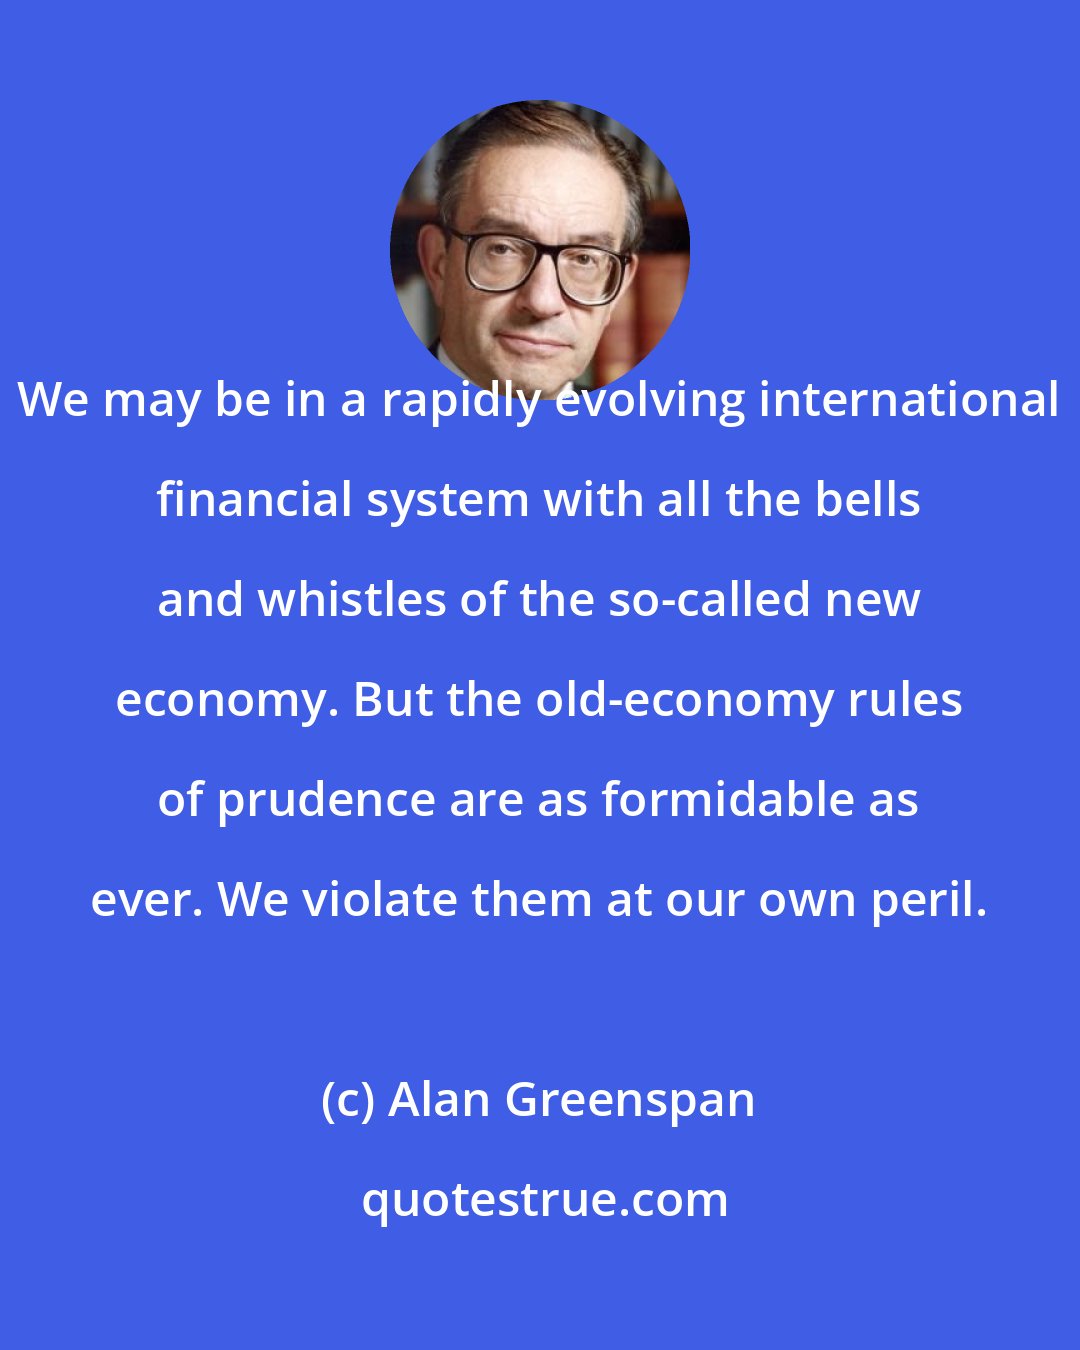 Alan Greenspan: We may be in a rapidly evolving international financial system with all the bells and whistles of the so-called new economy. But the old-economy rules of prudence are as formidable as ever. We violate them at our own peril.